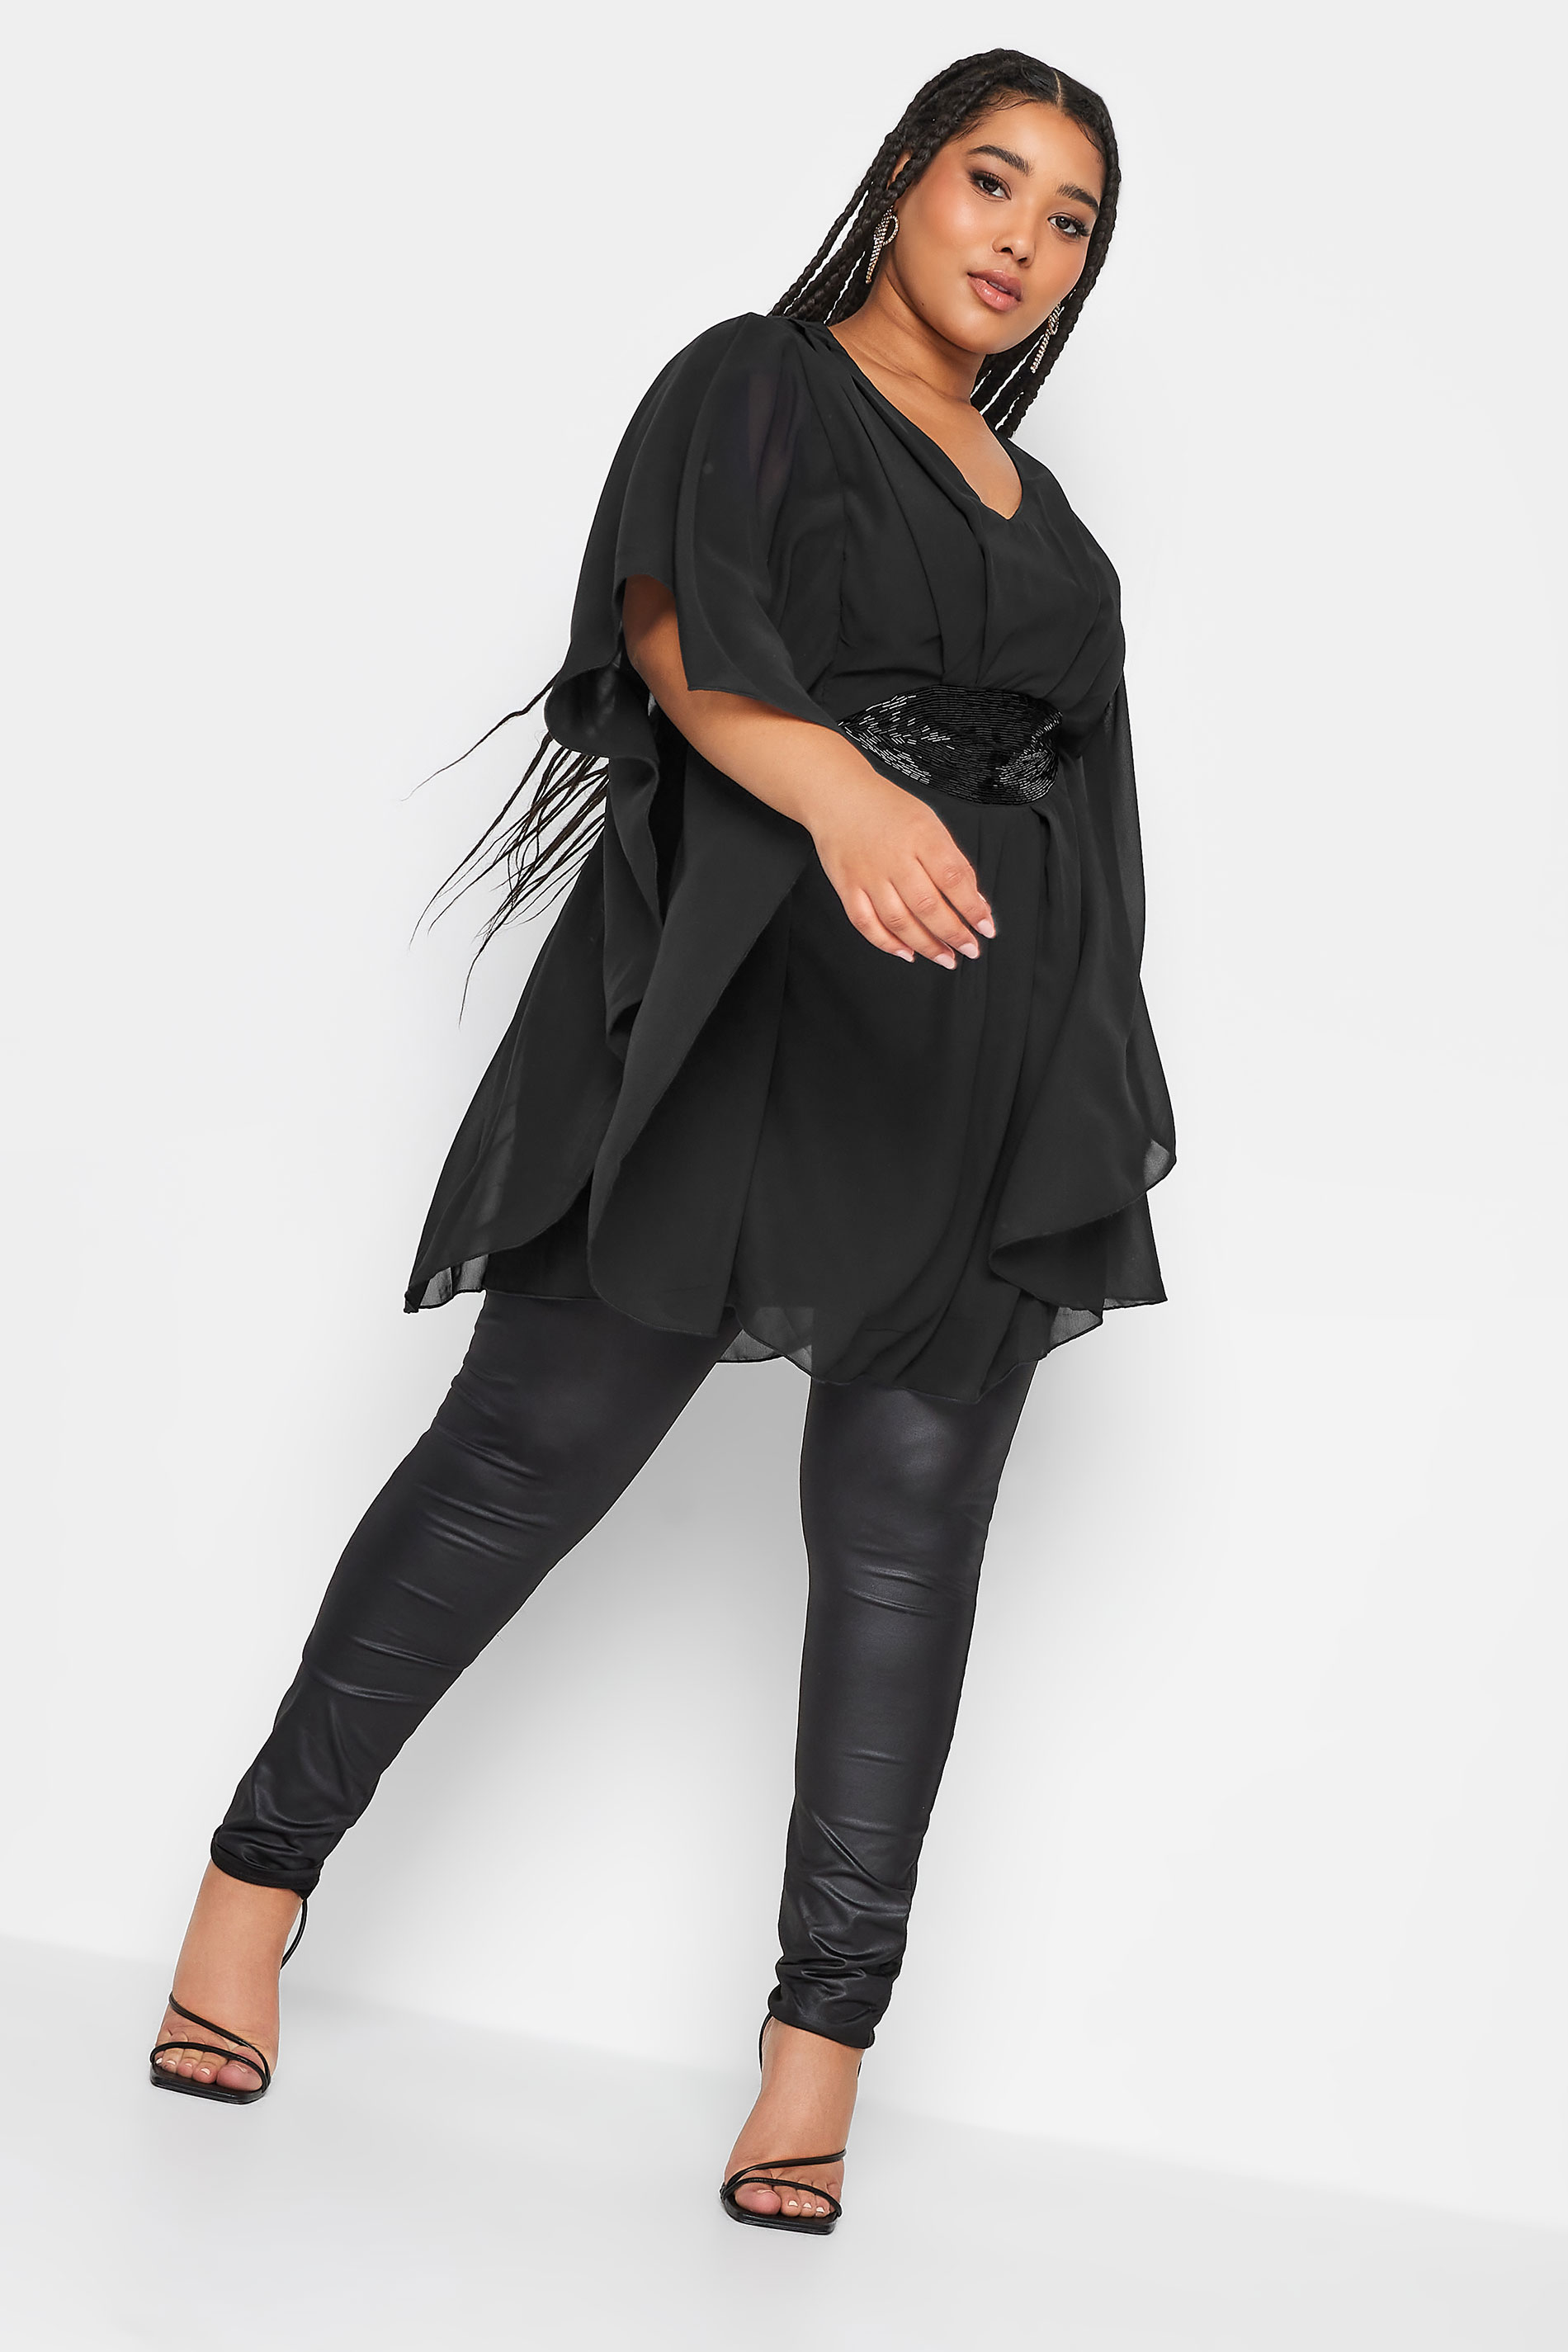 LUXE Plus Size Black Hand Embellished Waist Cape Top | Yours Clothing 2